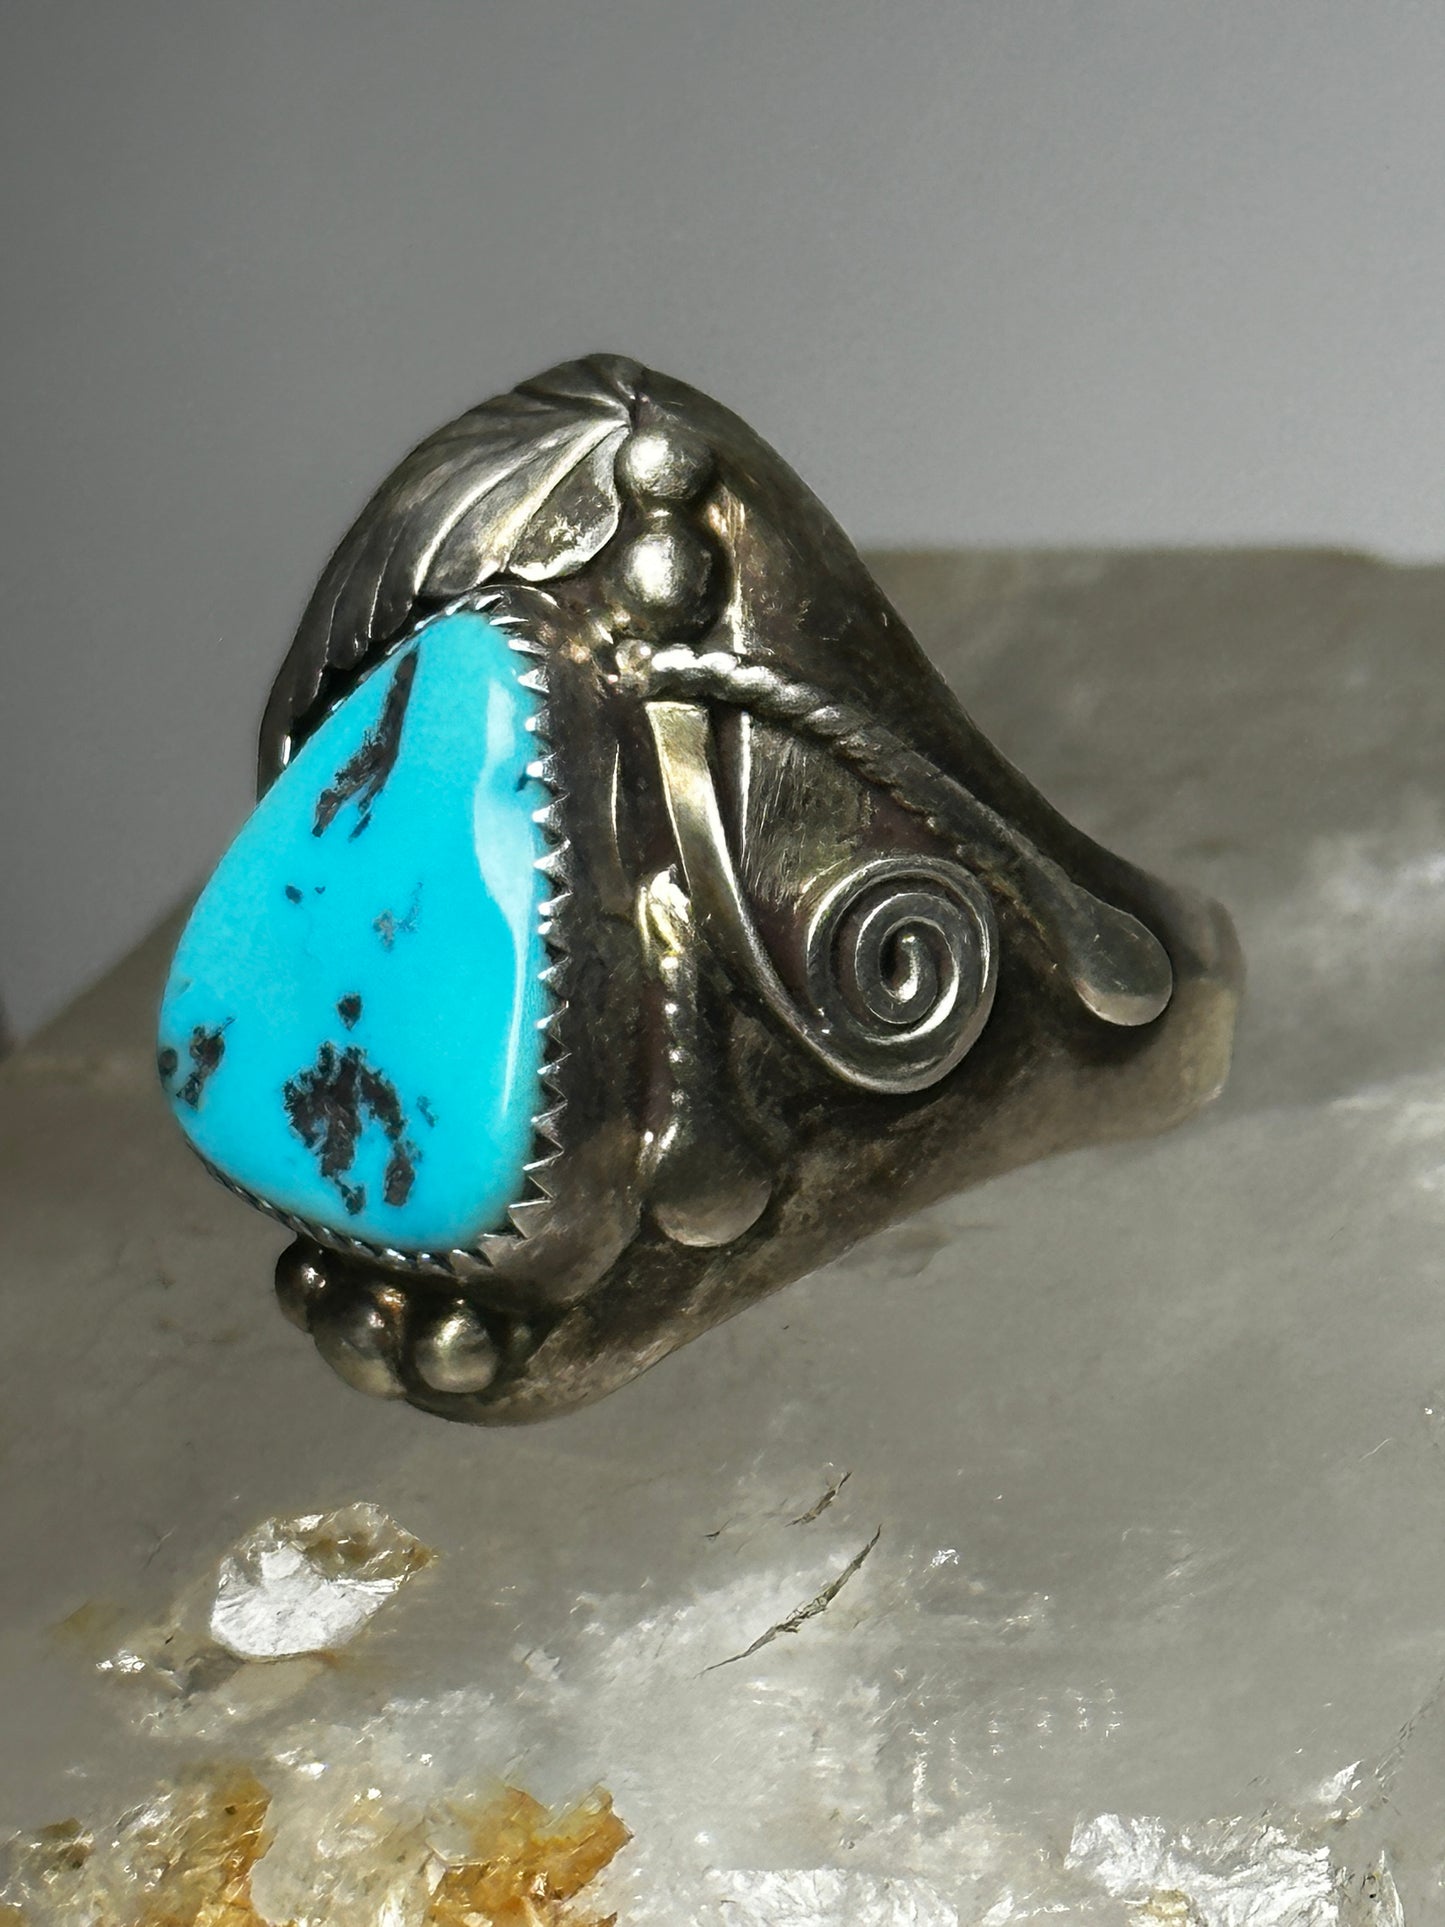 Turquoise ring size 10.25 Heavy Navajo sterling silver band women men